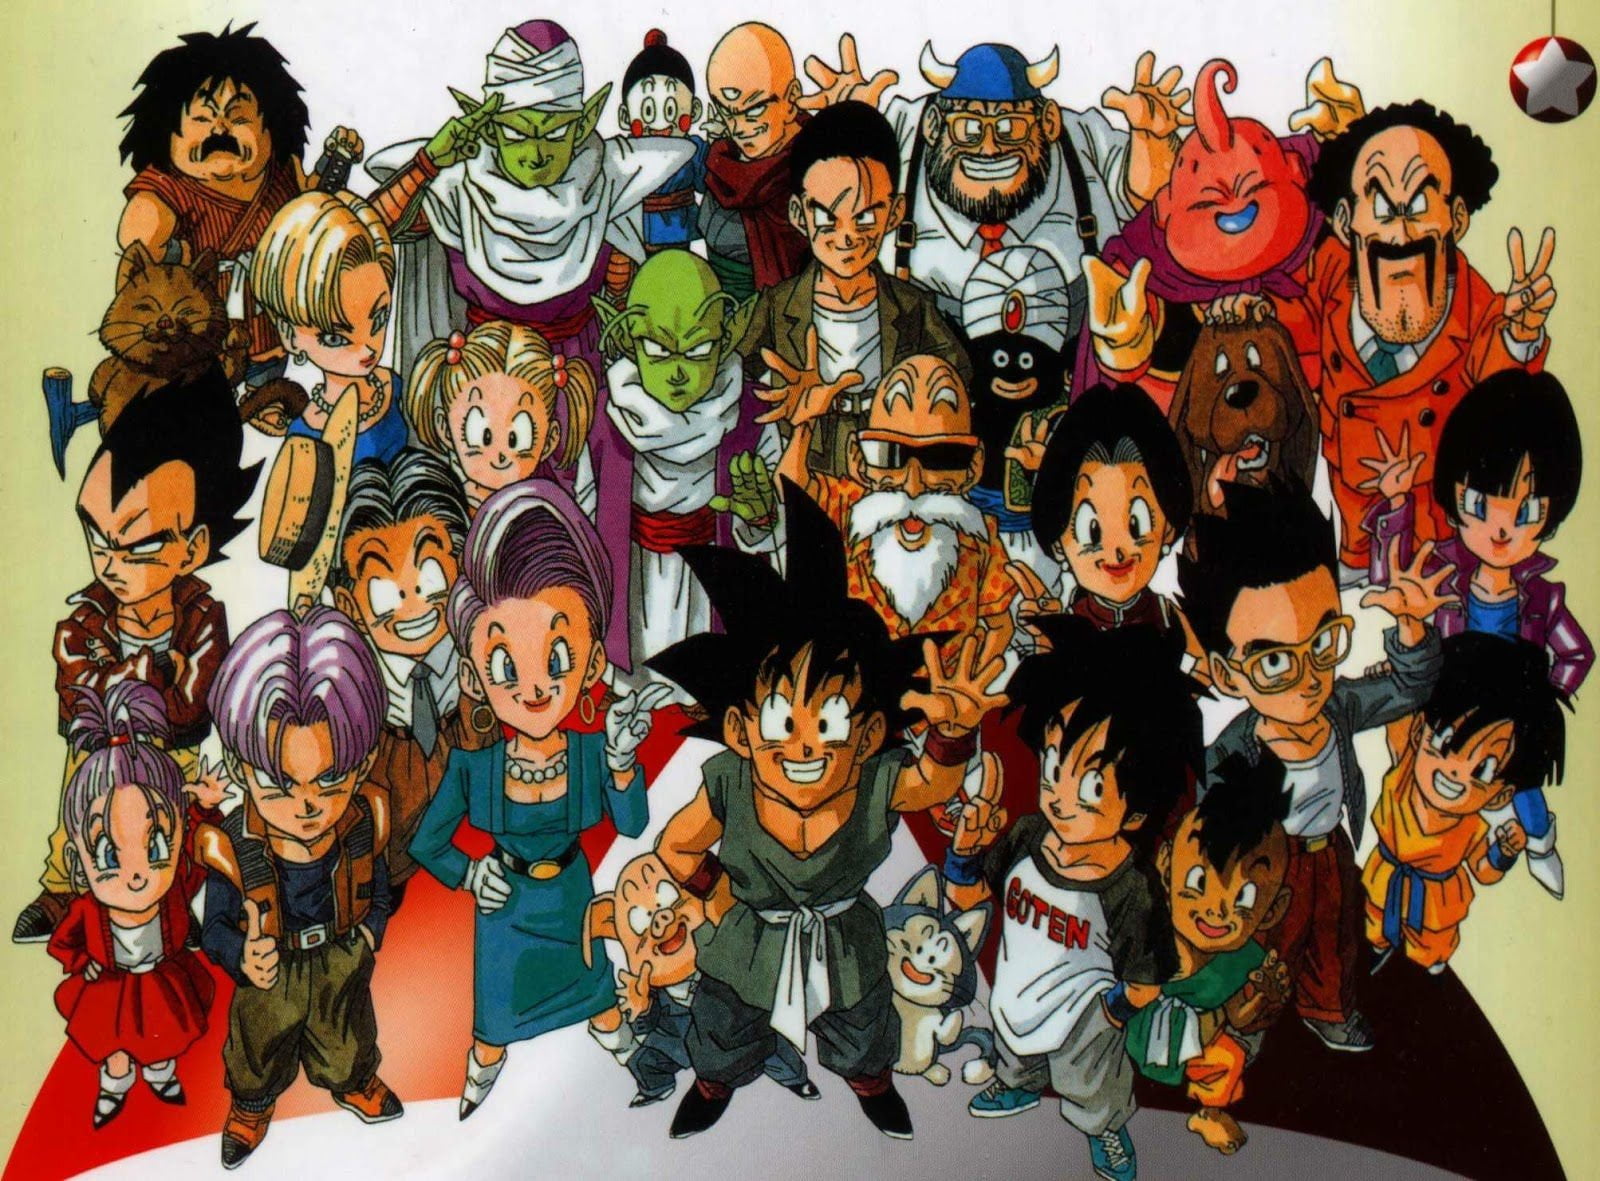 Dragon Ball Z characters illustraion, people, multi Colored, illustration